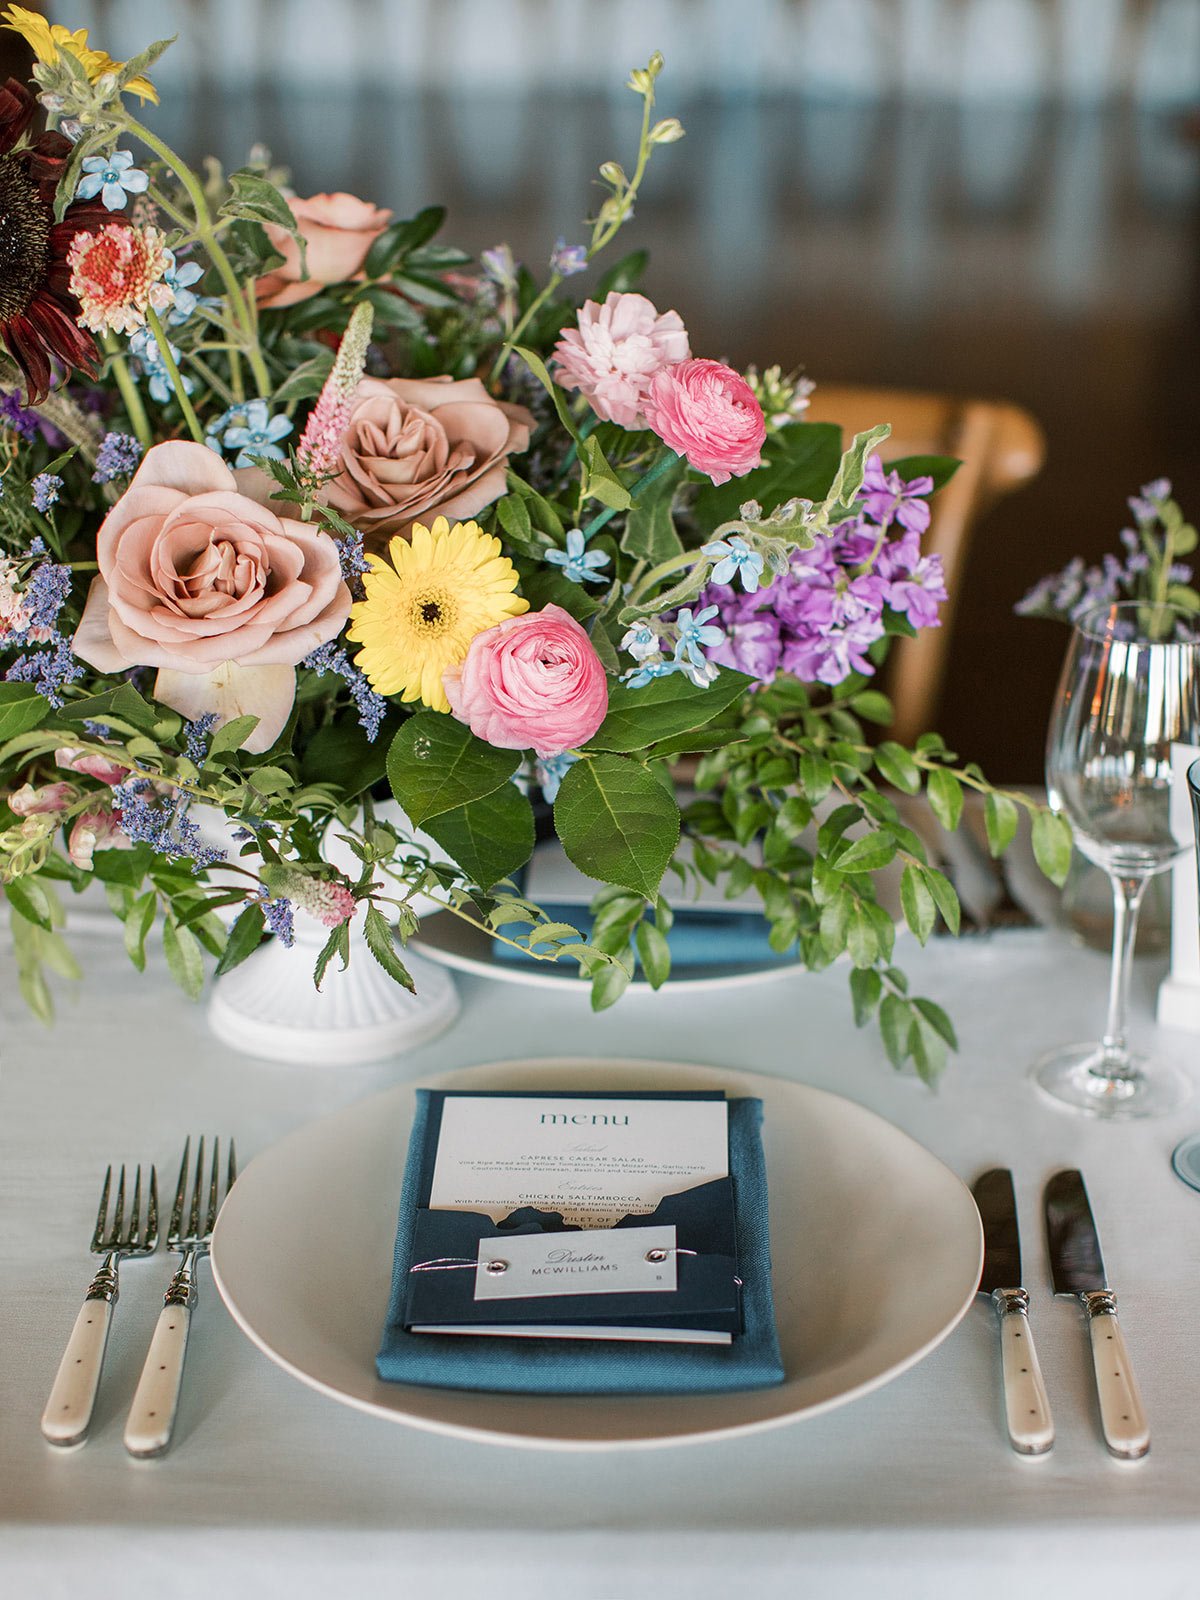 Montana wedding place setting with blue menu and colorful wildflower wedding flowers designed by Shannon rose events